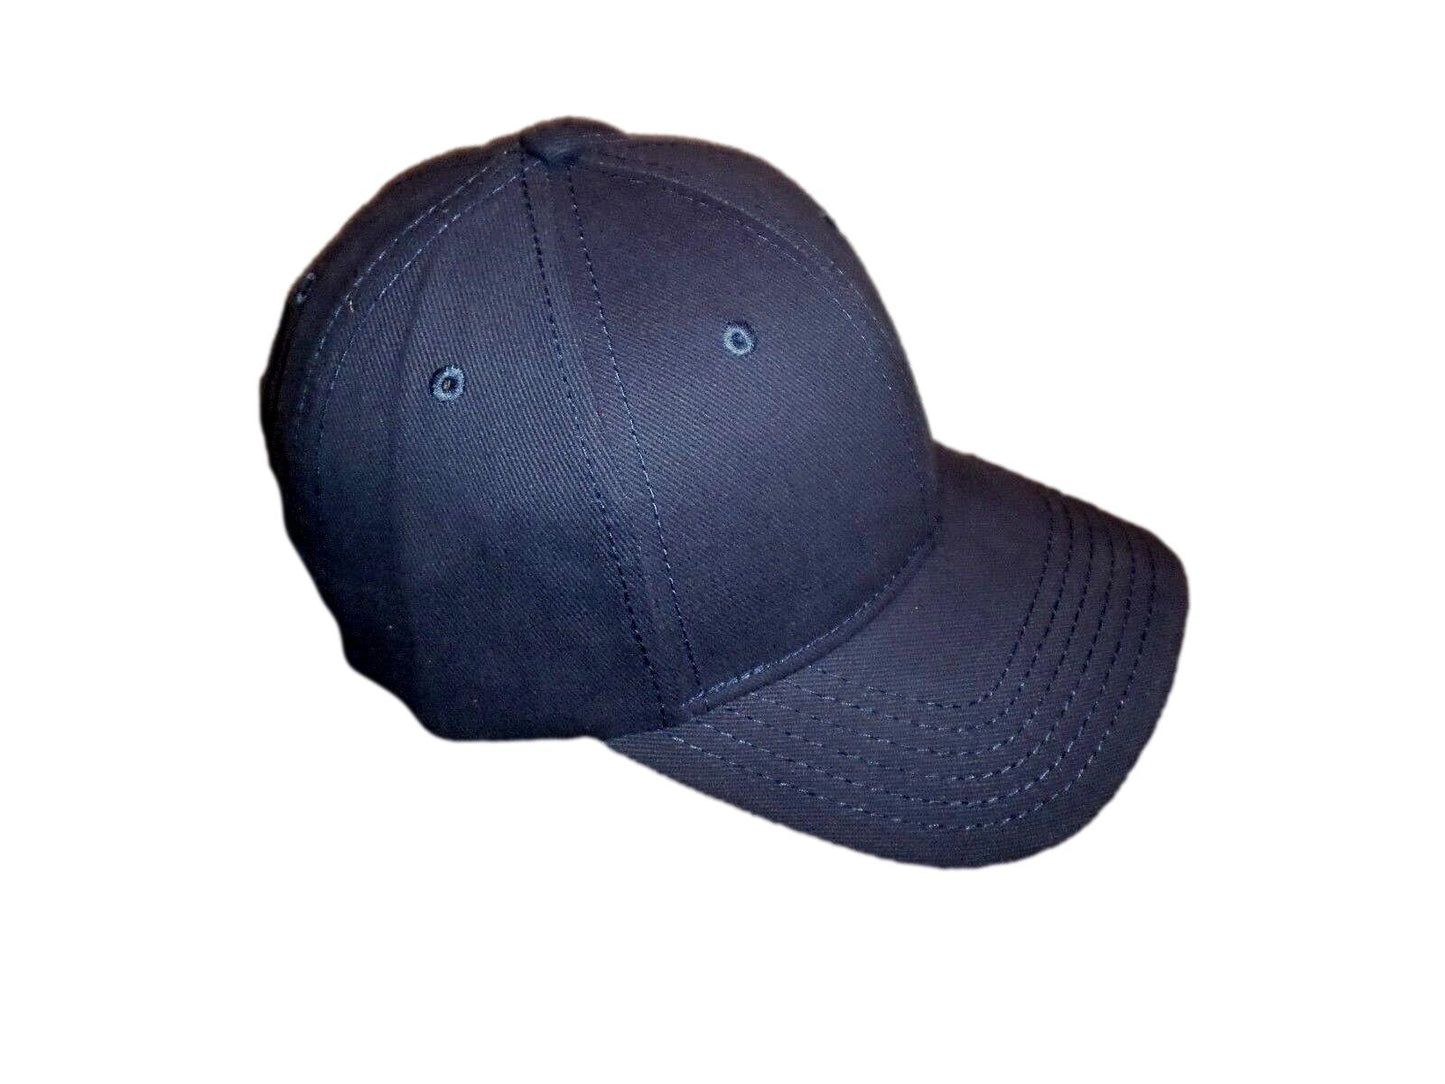 NAVY BLUE HAT BALL CAP BRUSHED COTTON LOW PROFILE NEW